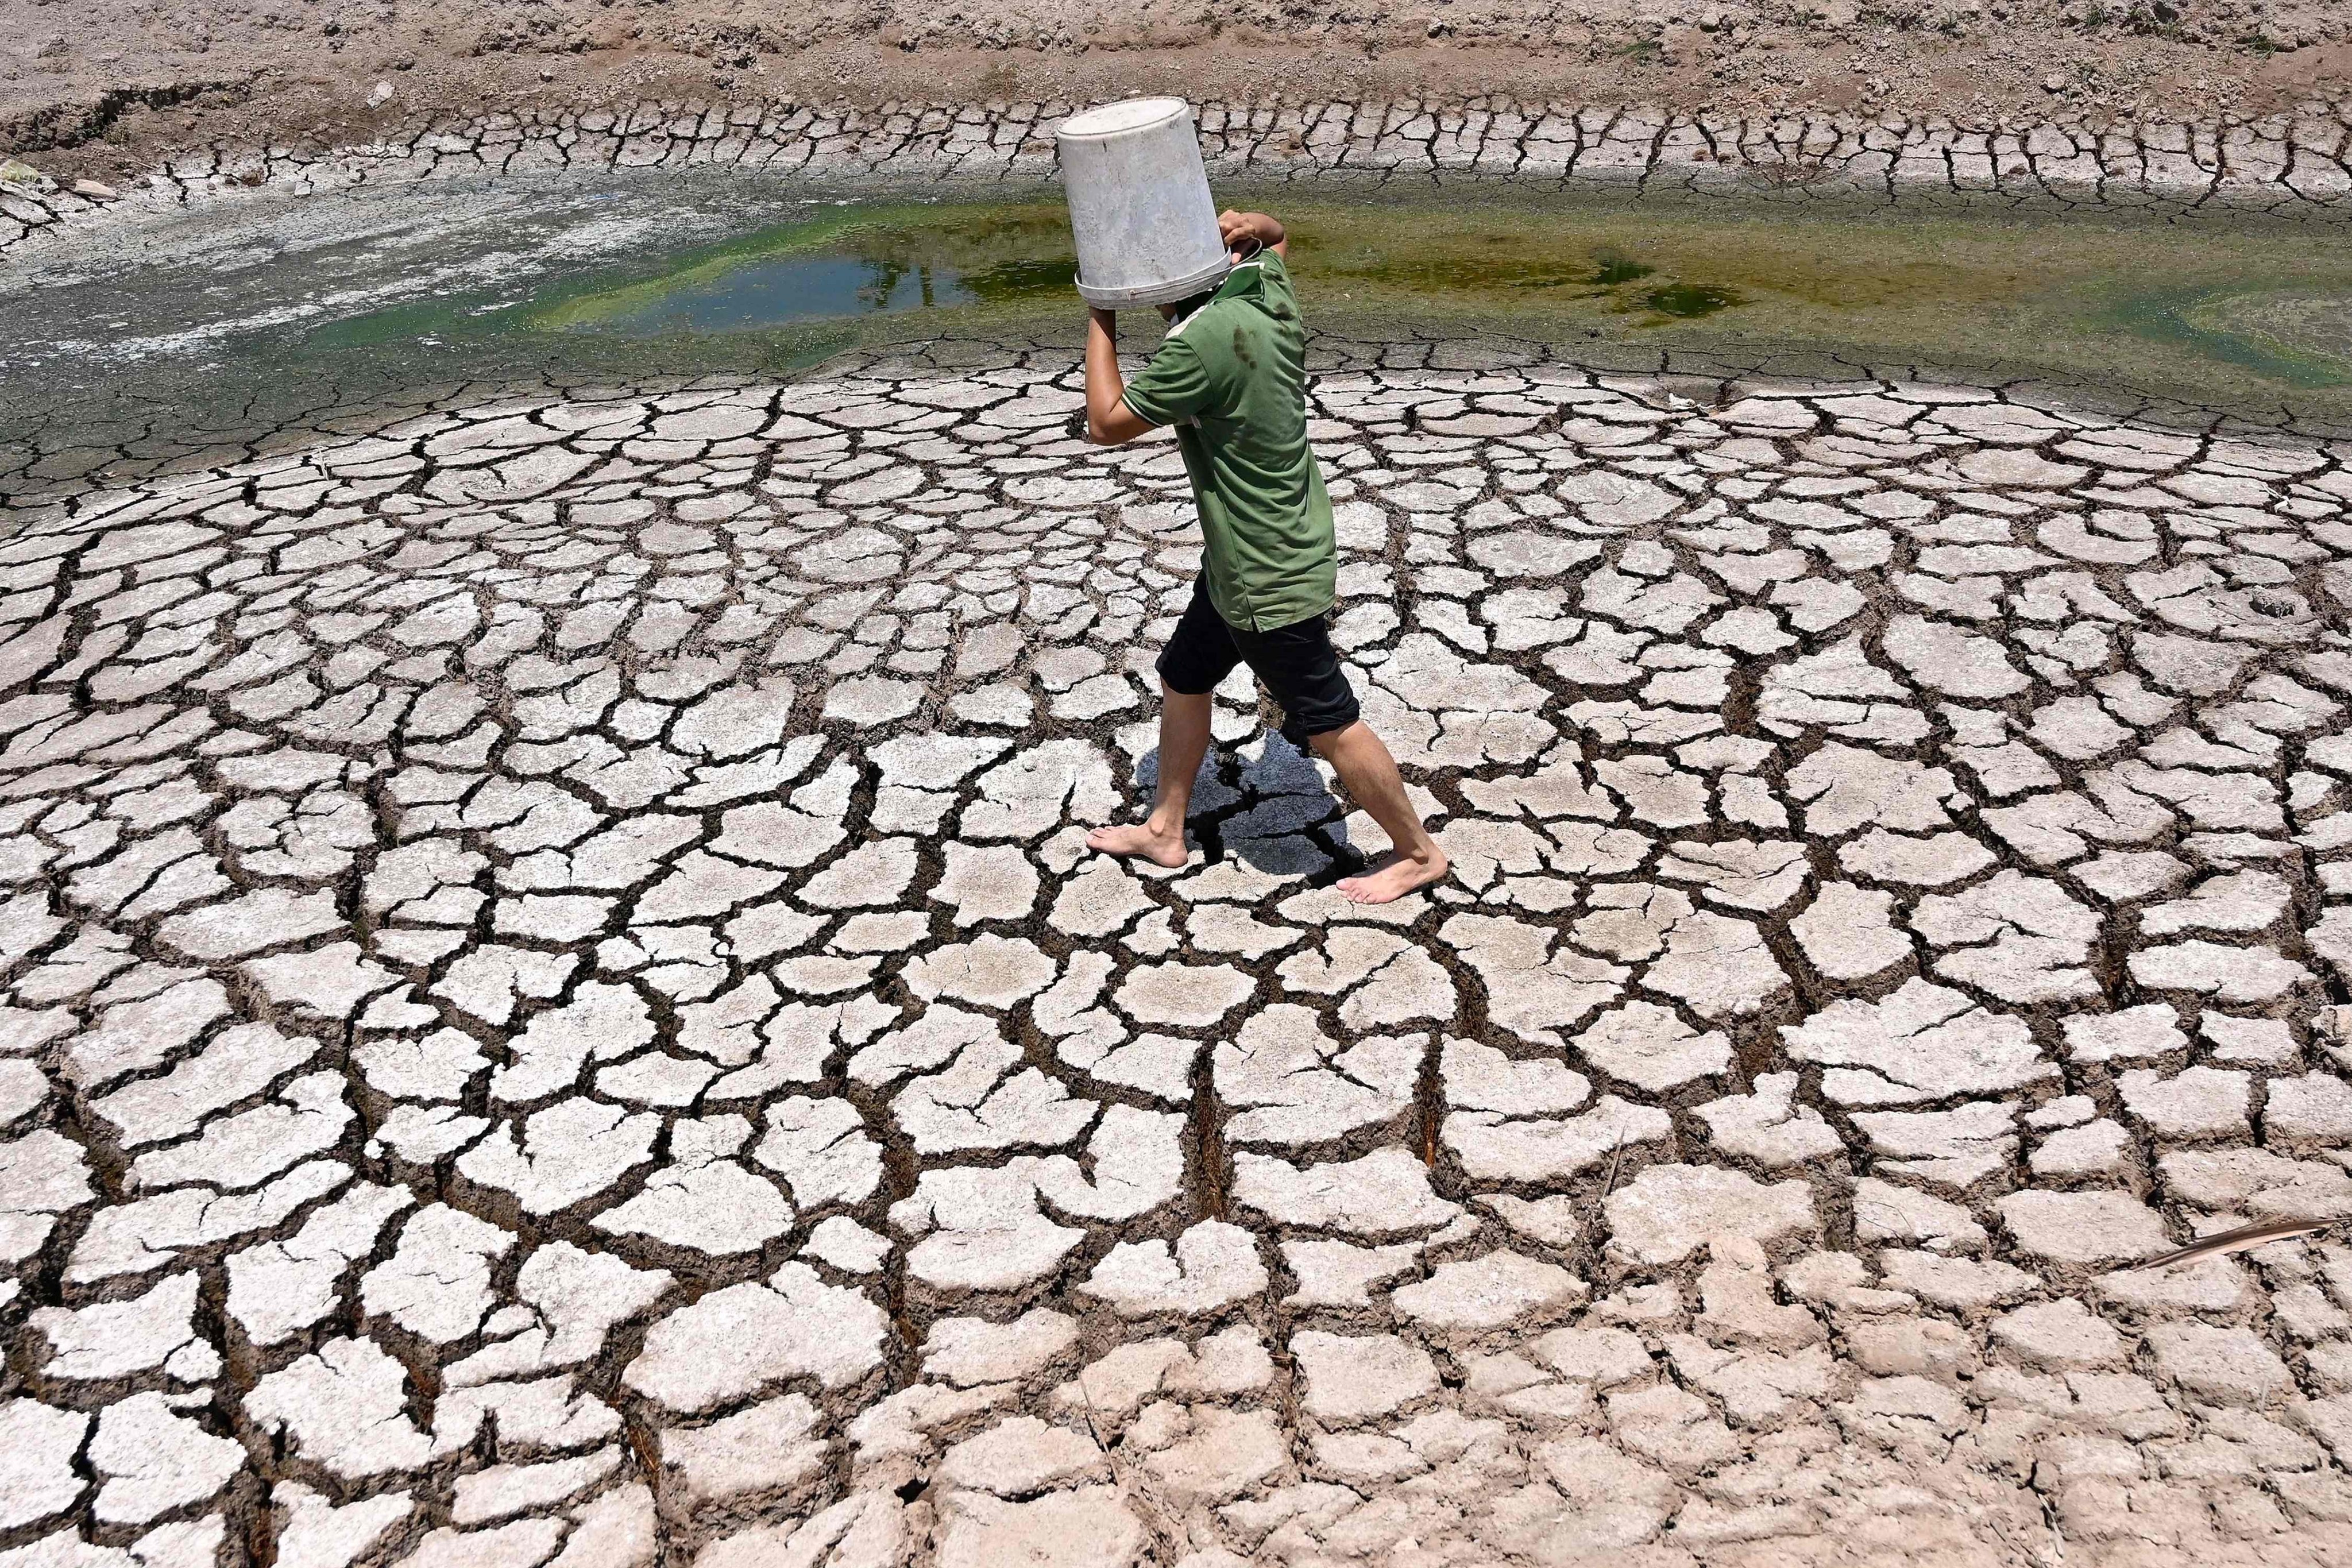 A man carries a plastic bucket across the cracked bed of a dried-up pond in Vietnam’s southern Ben Tre province on March 19. Photo: AFP